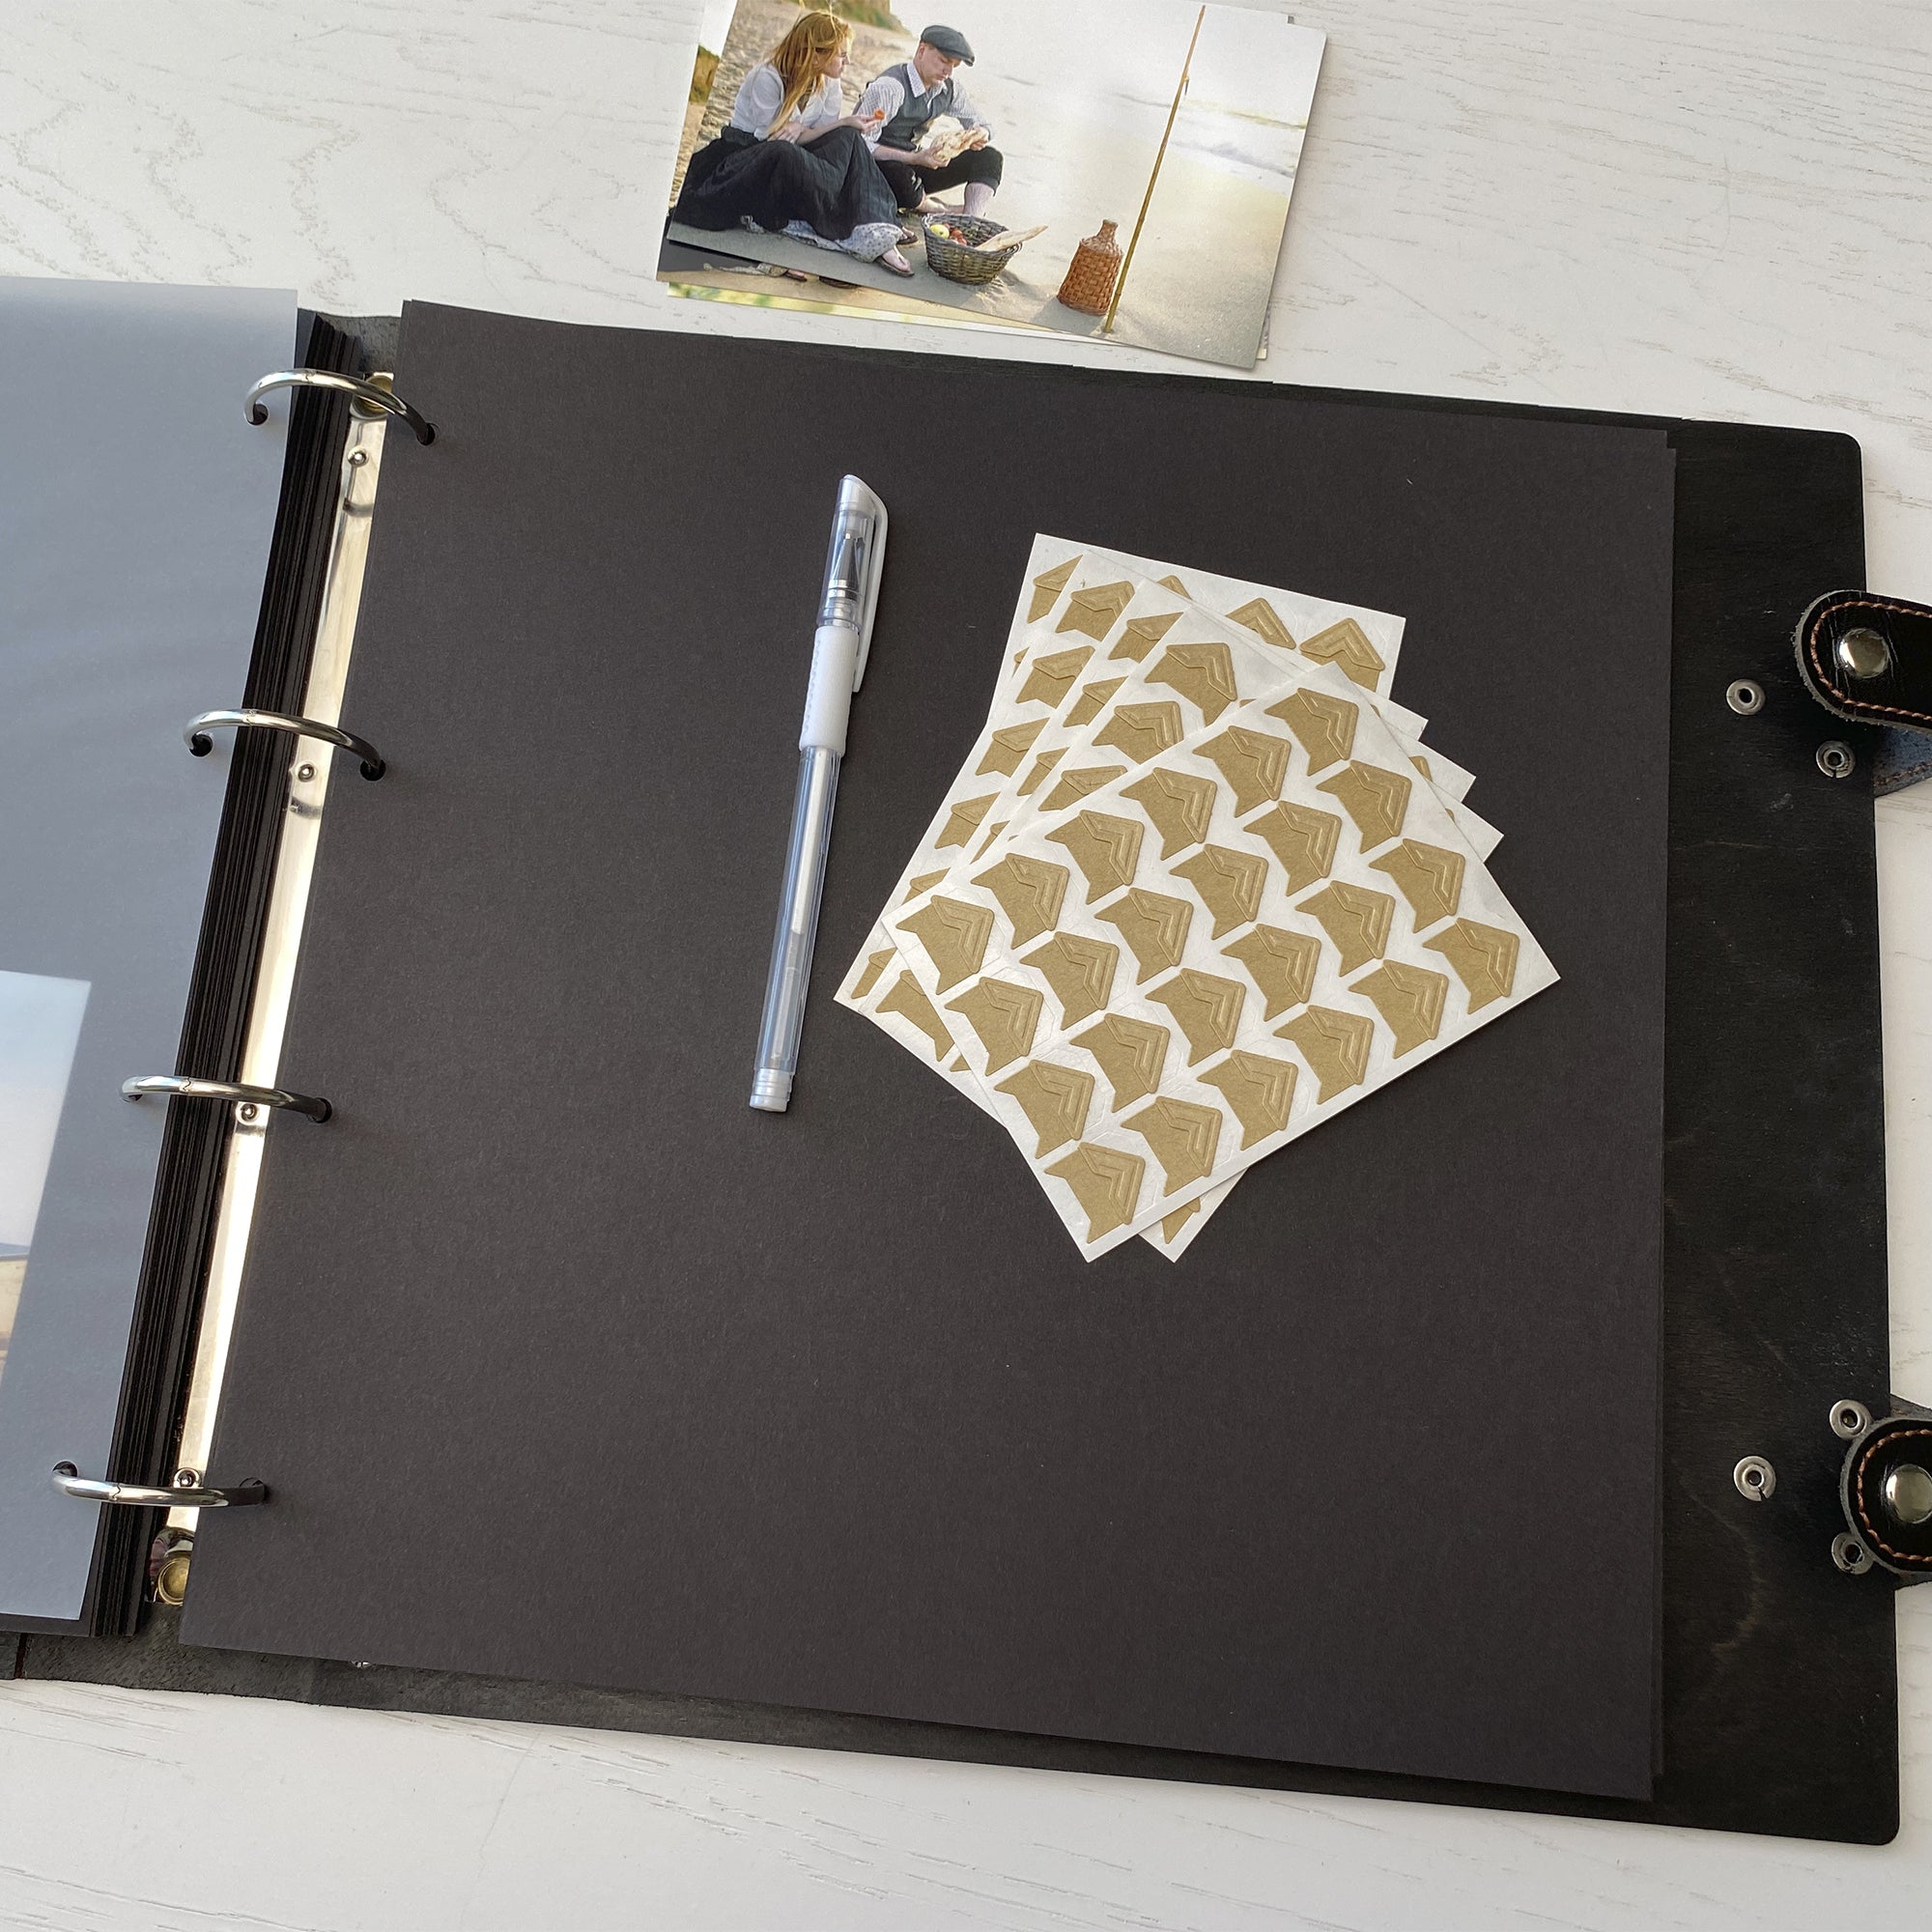 Personalized photo album with leather cover and Magnolias engraving